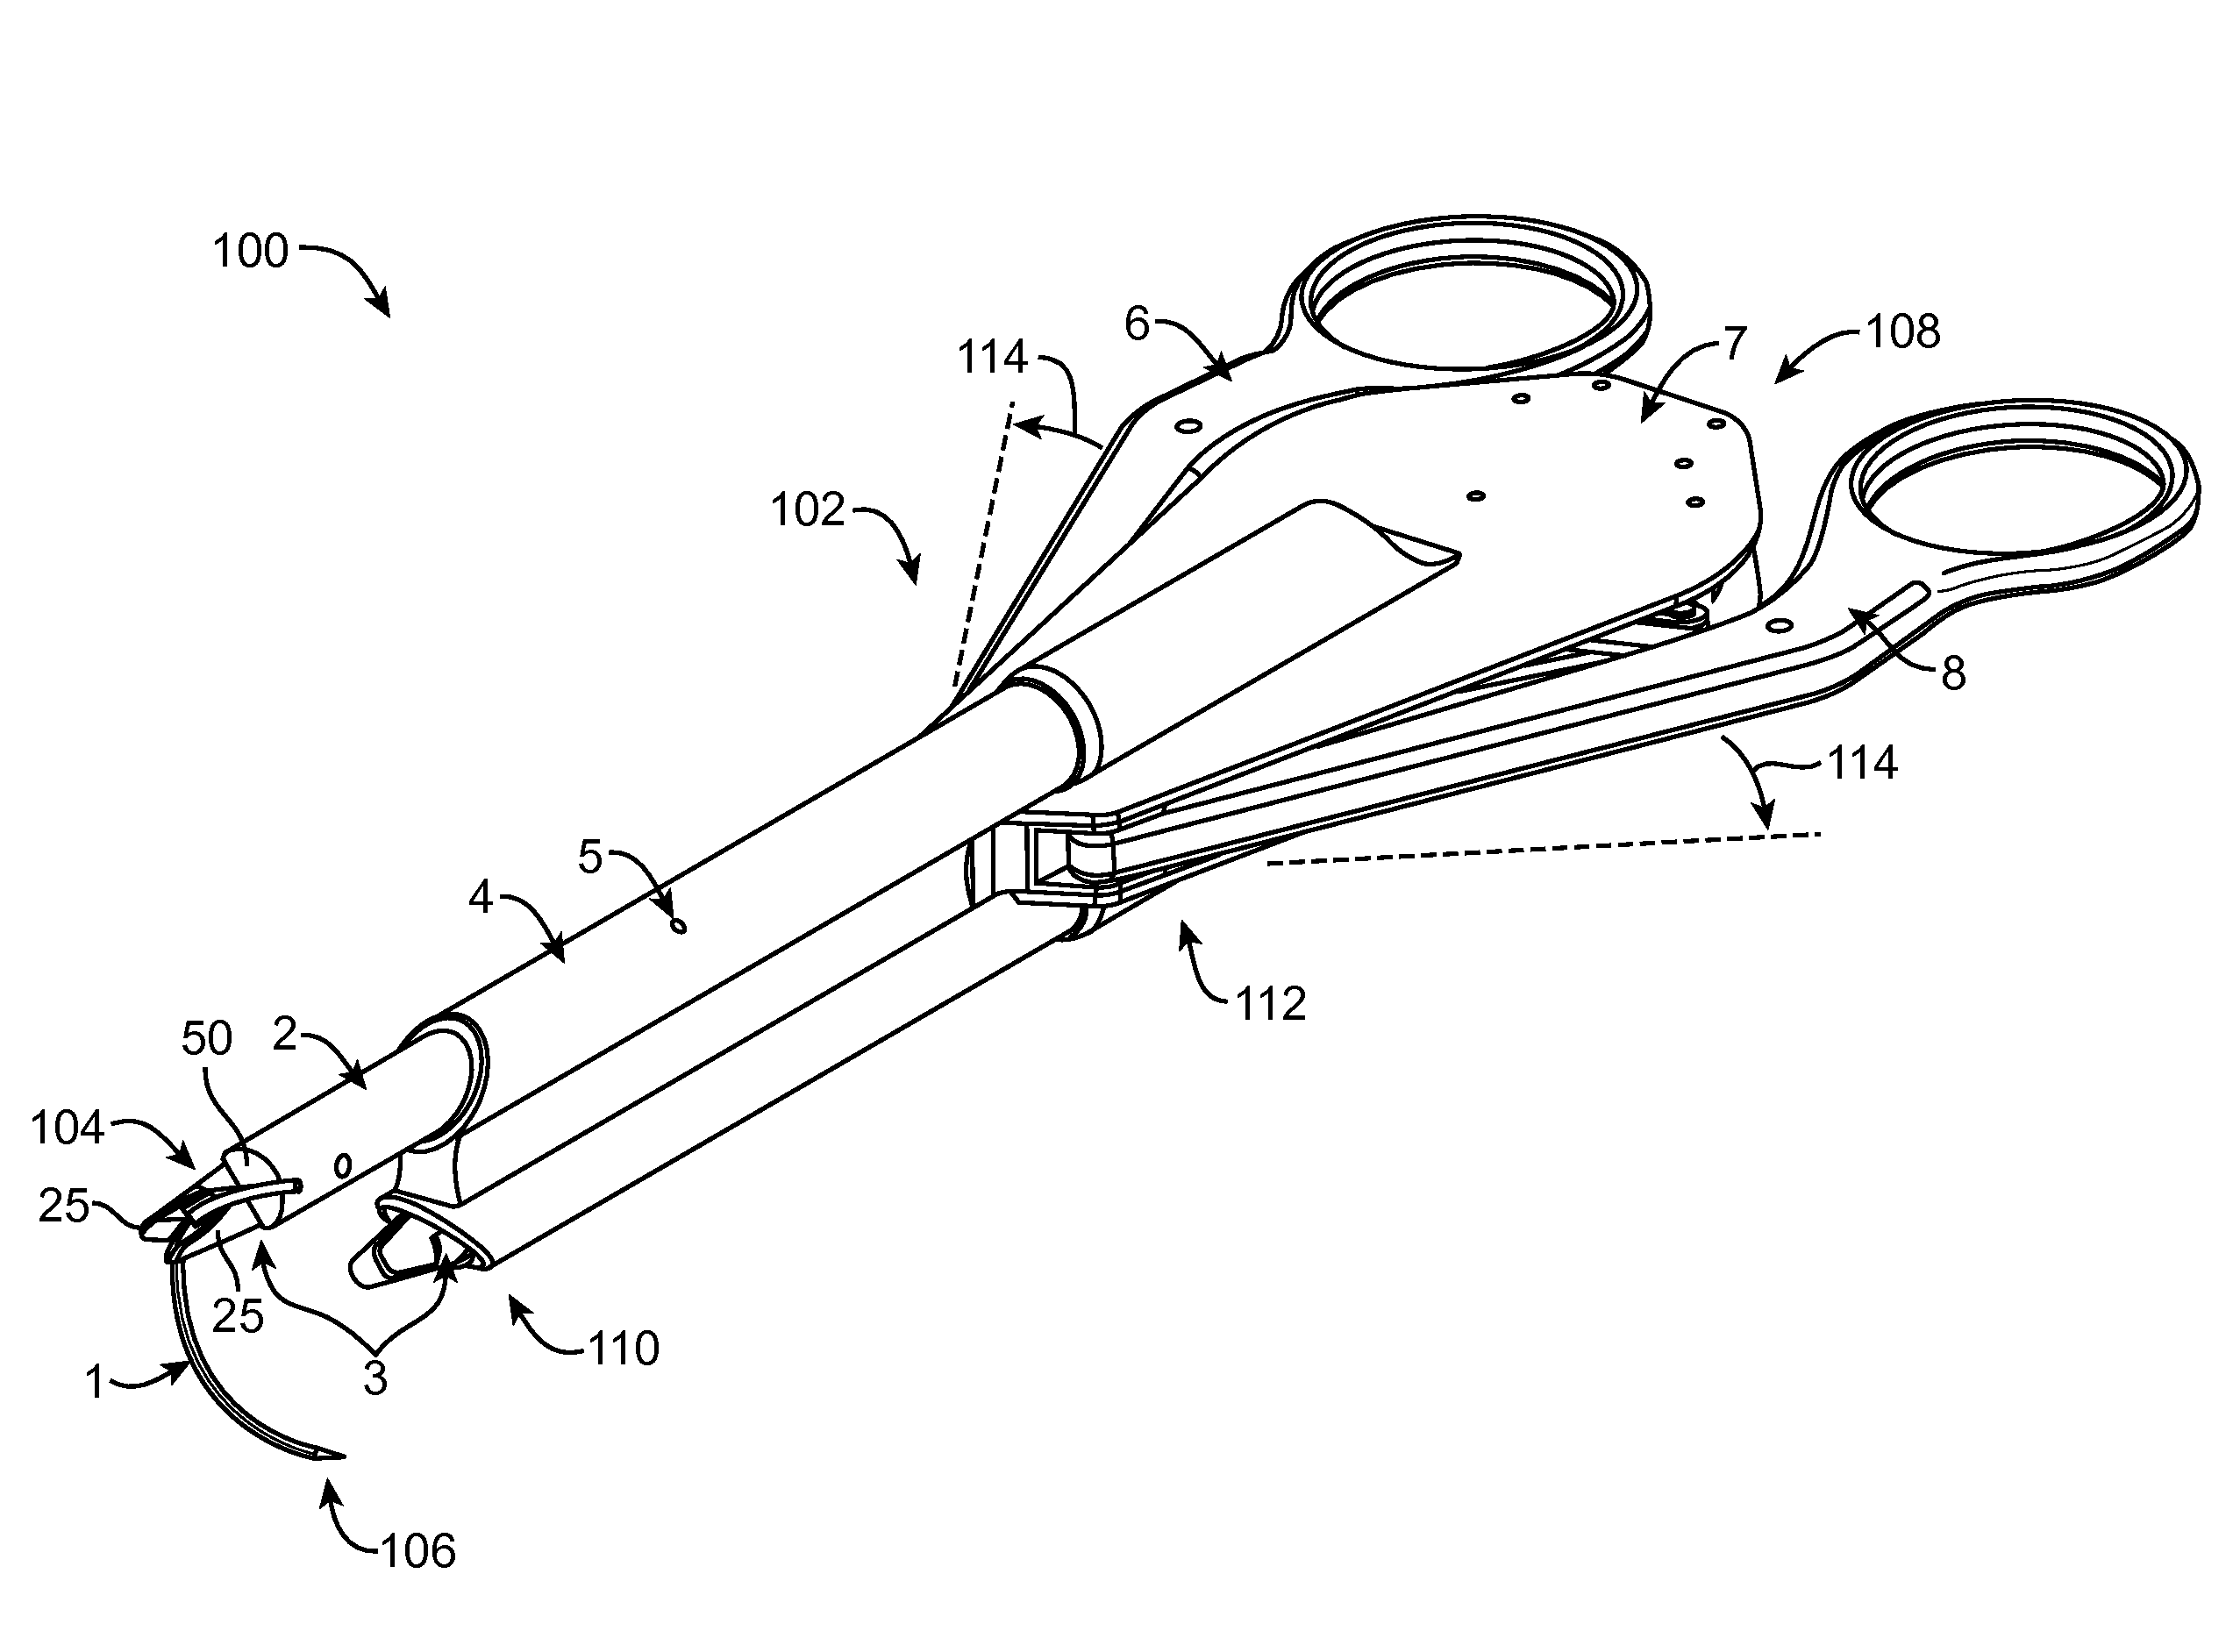 Offset jaw suturing device, system, and methods